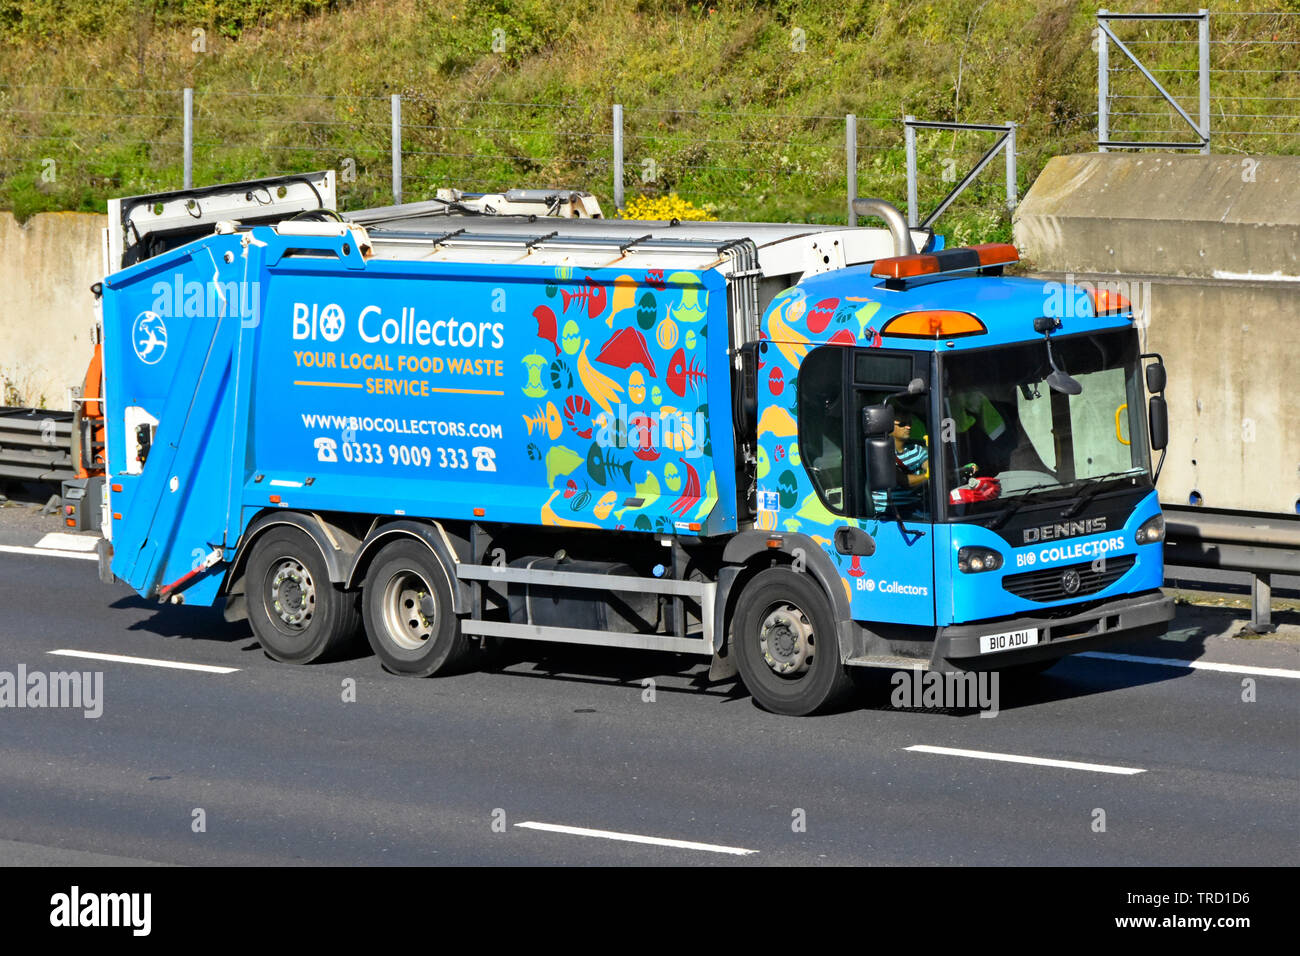 Lorry truck for food waste collection & delivery to recycling biogas plant via anaerobic digestion operated by Bio Collectors Ltd London England UK Stock Photo